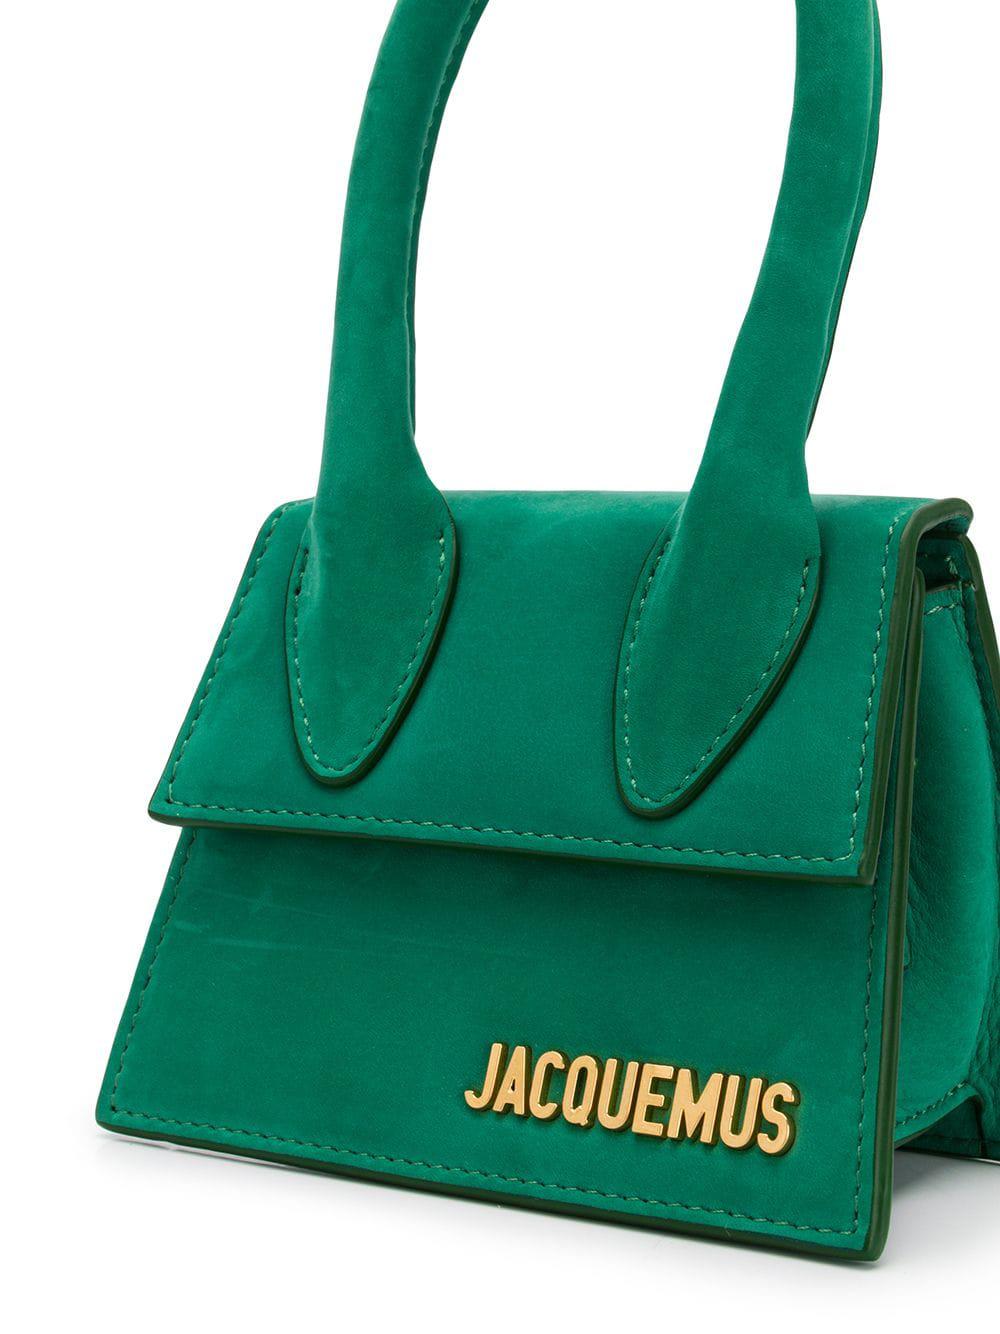 Jacquemus Le Chiquito Croc Print Leather Bag in Dark Green (Green) - Lyst